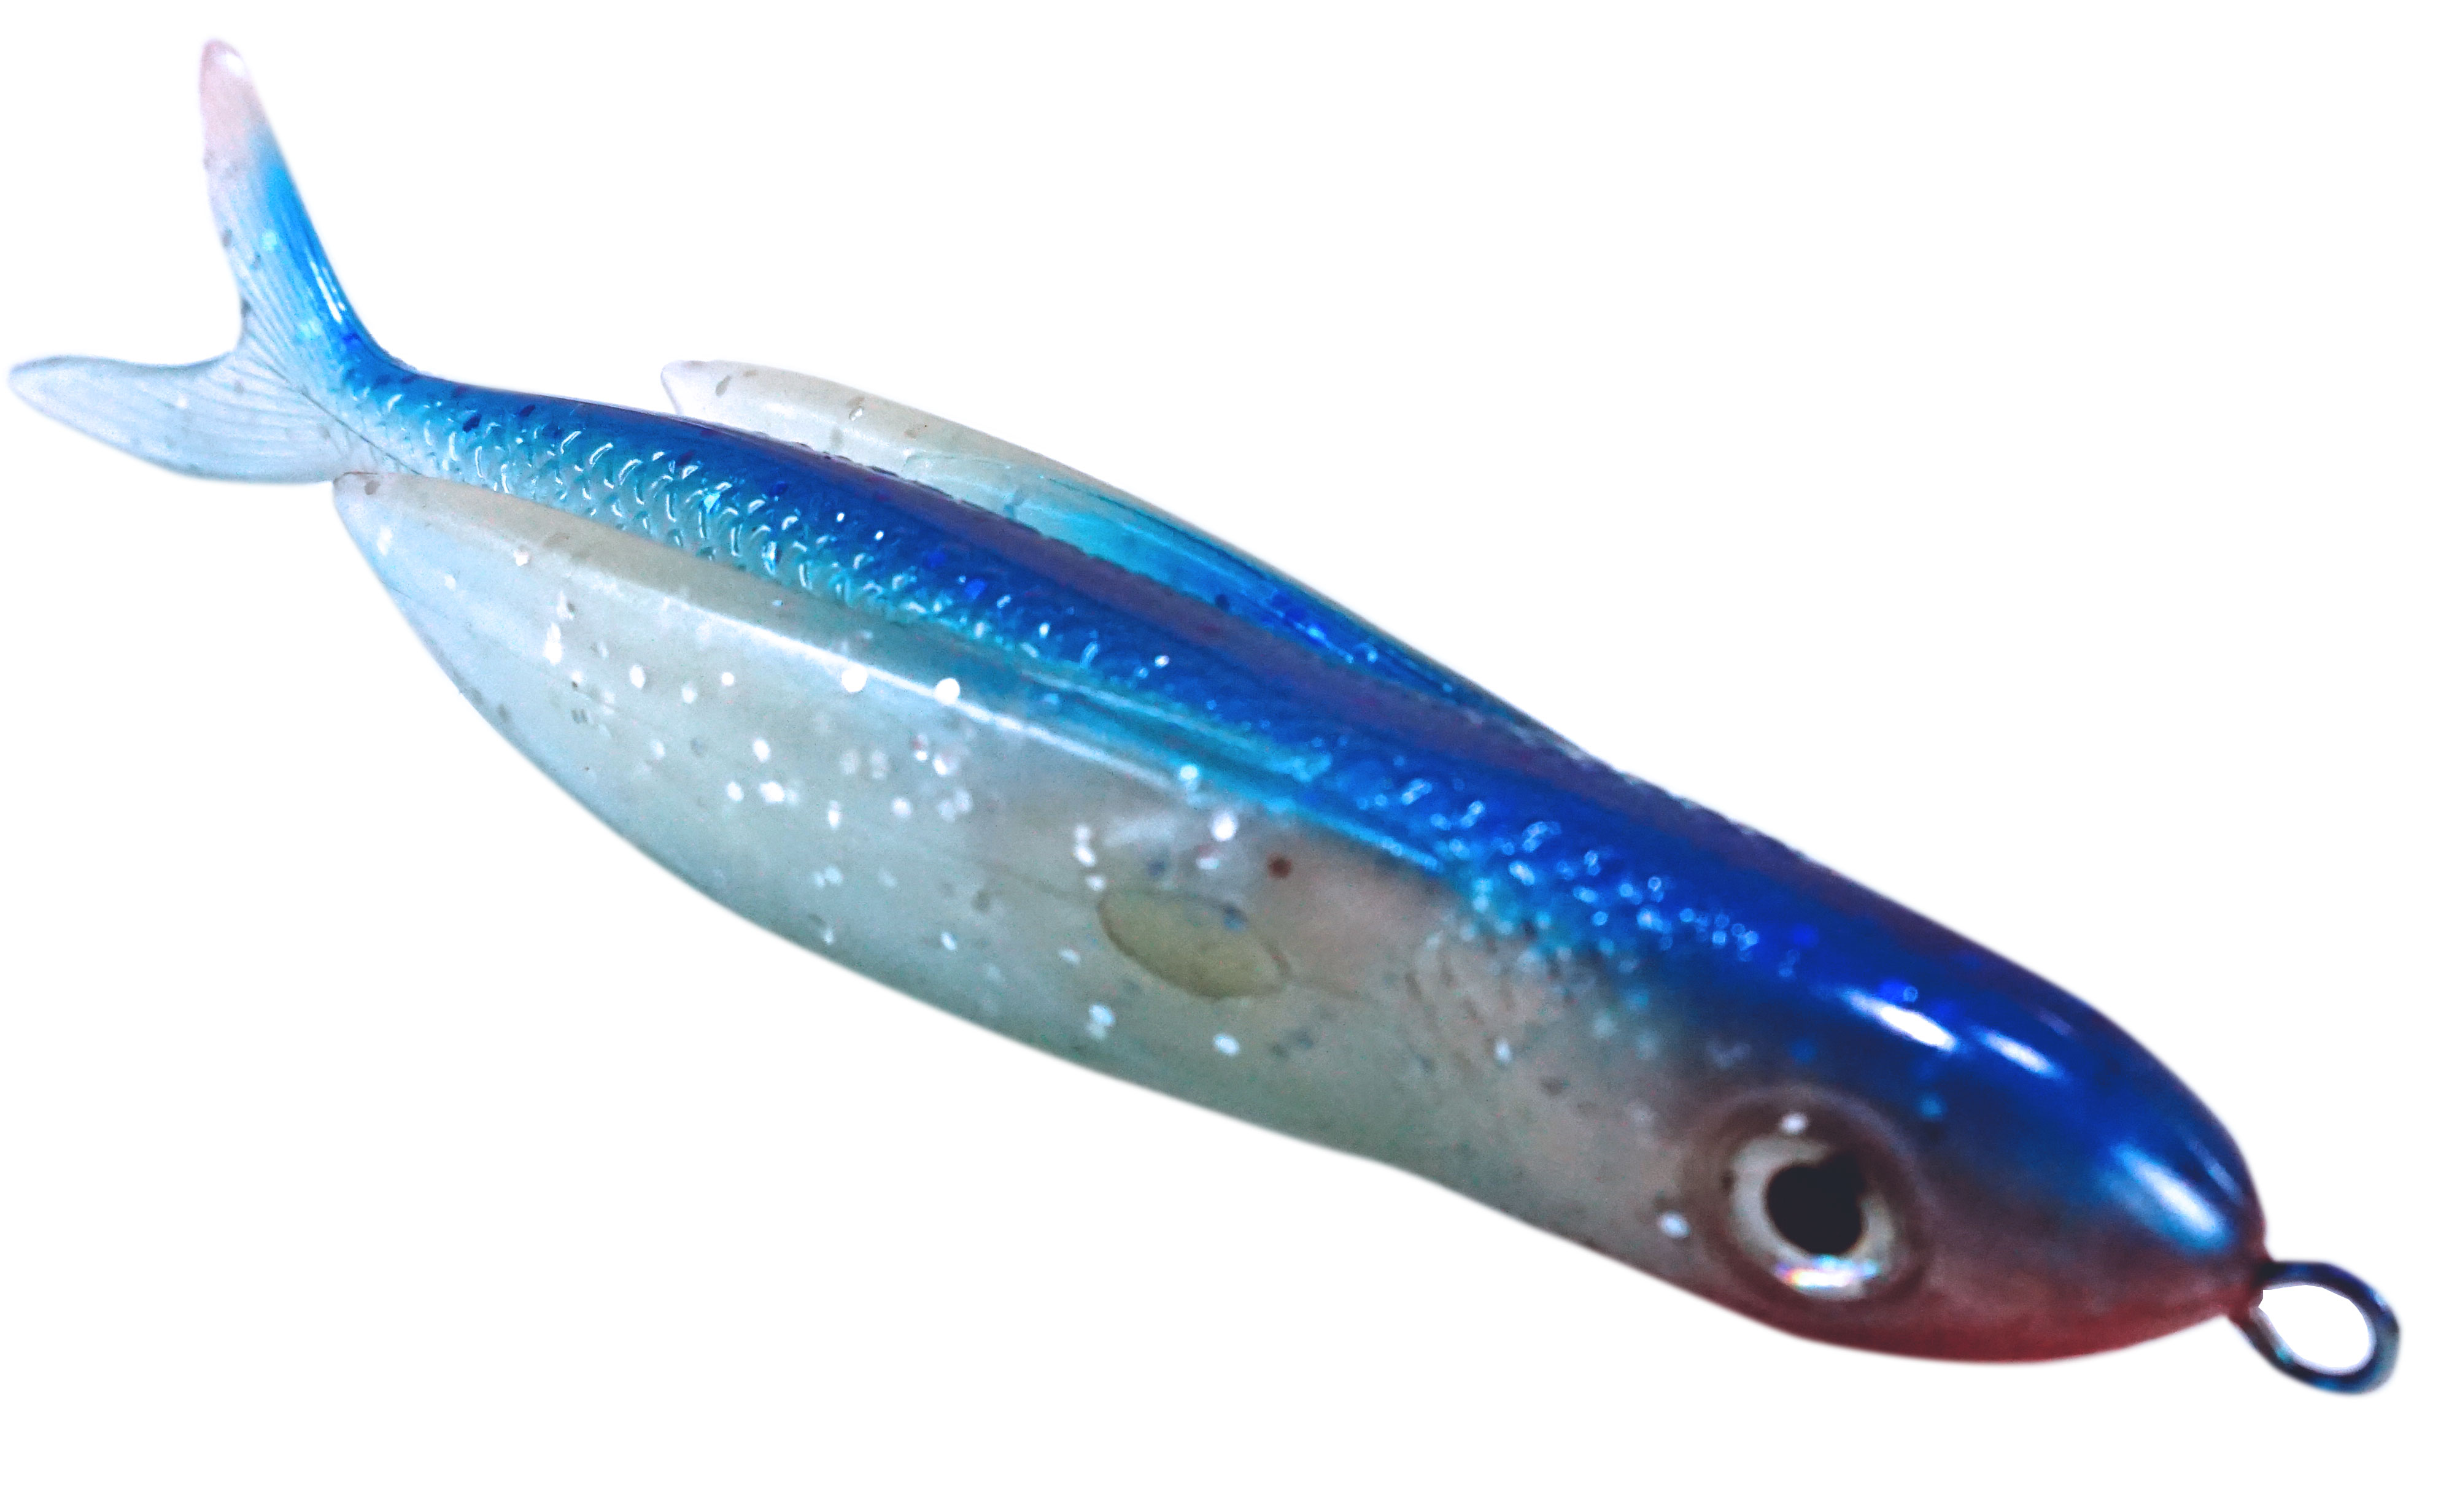 Almost Alive Lures 8.5" Soft Plastic Flying Fish with Swept Back Wing Bait Blue Back/Red Nose with Spring